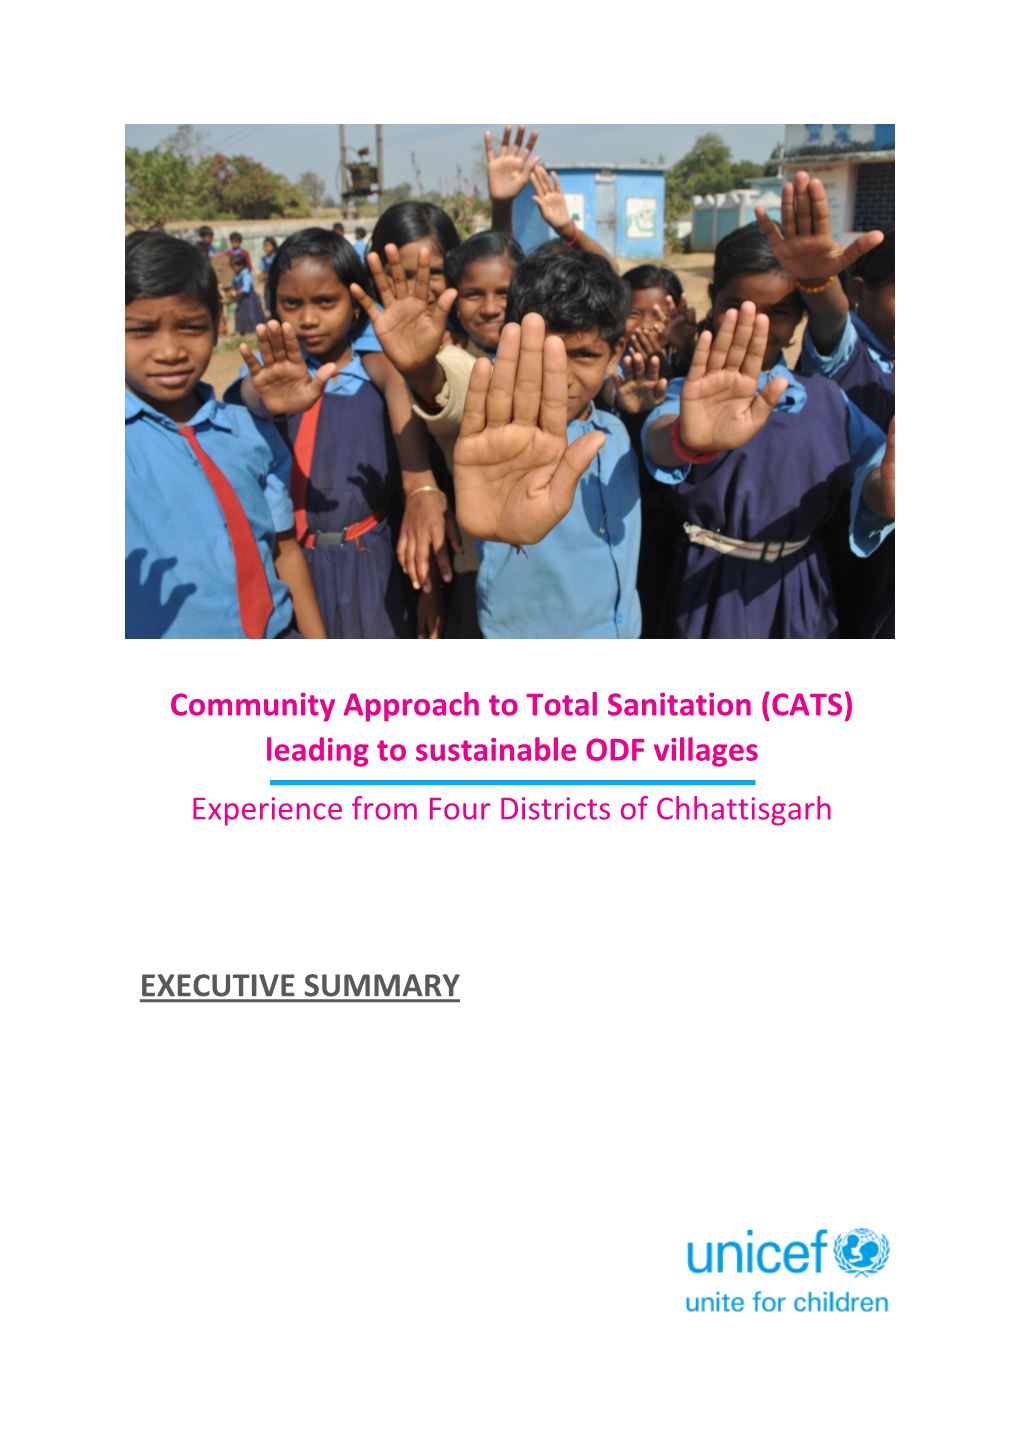 Community Approach to Total Sanitation (CATS) Leading to Sustainable ODF Villages Experience from Four Districts of Chhattisgarh